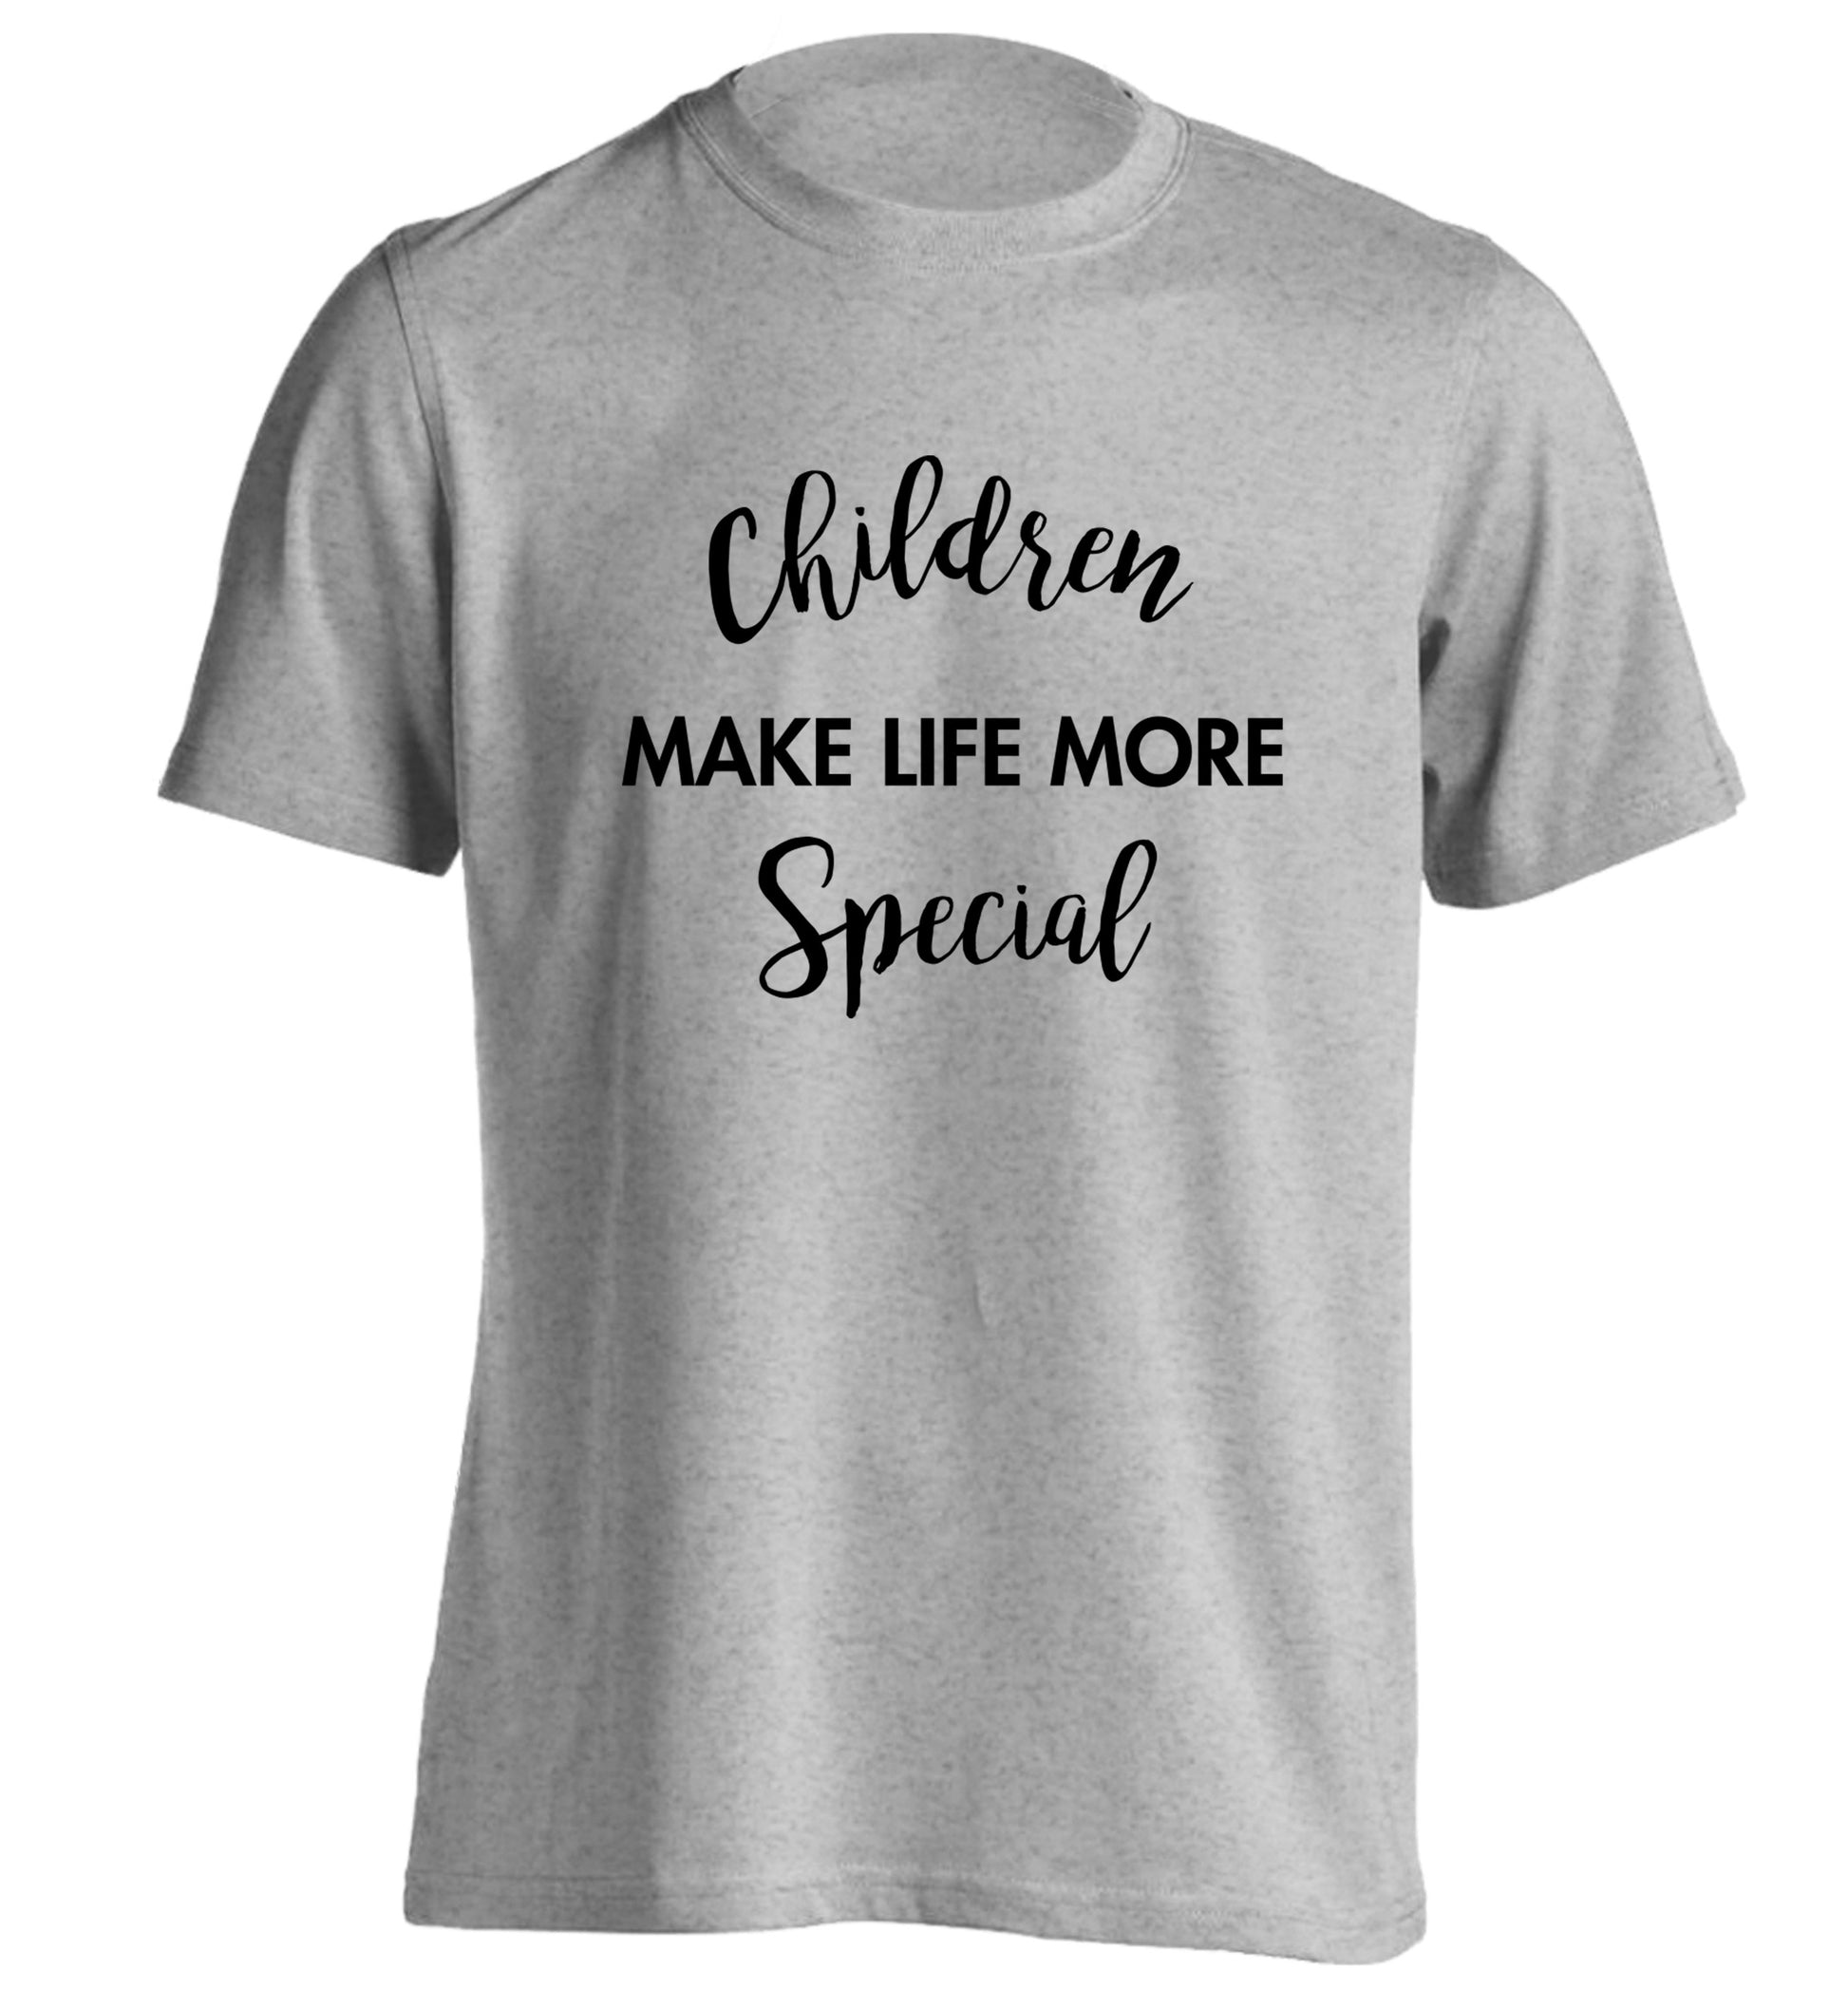 Children make life more special adults unisex grey Tshirt 2XL